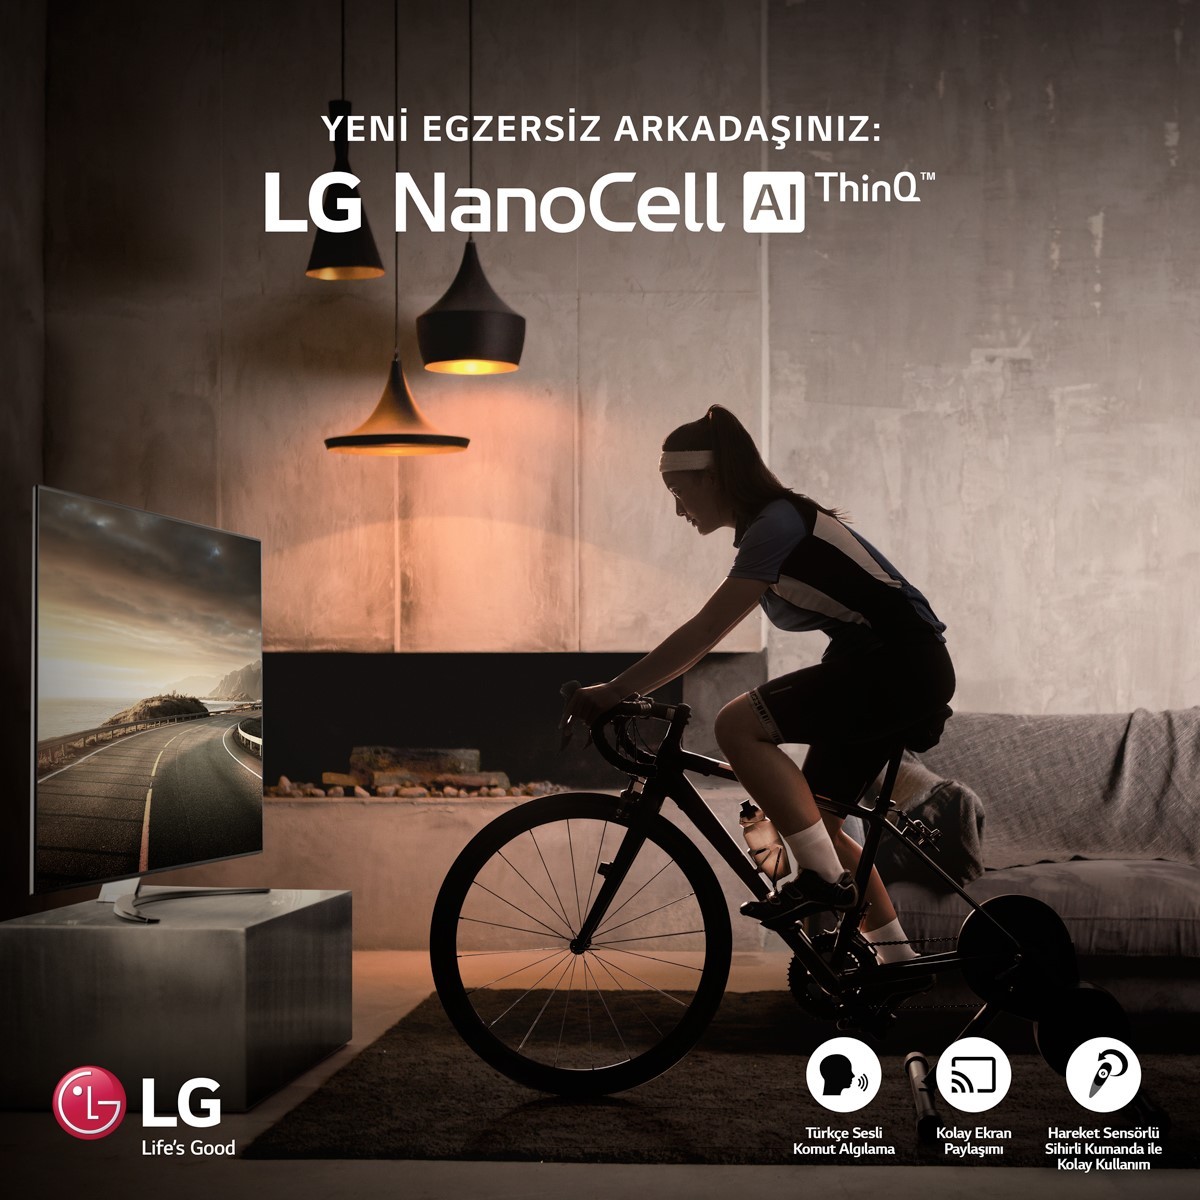 A woman participates in the LG Indoor Cycle Challenge by riding her bike in front of her living room LG NanoCell TV